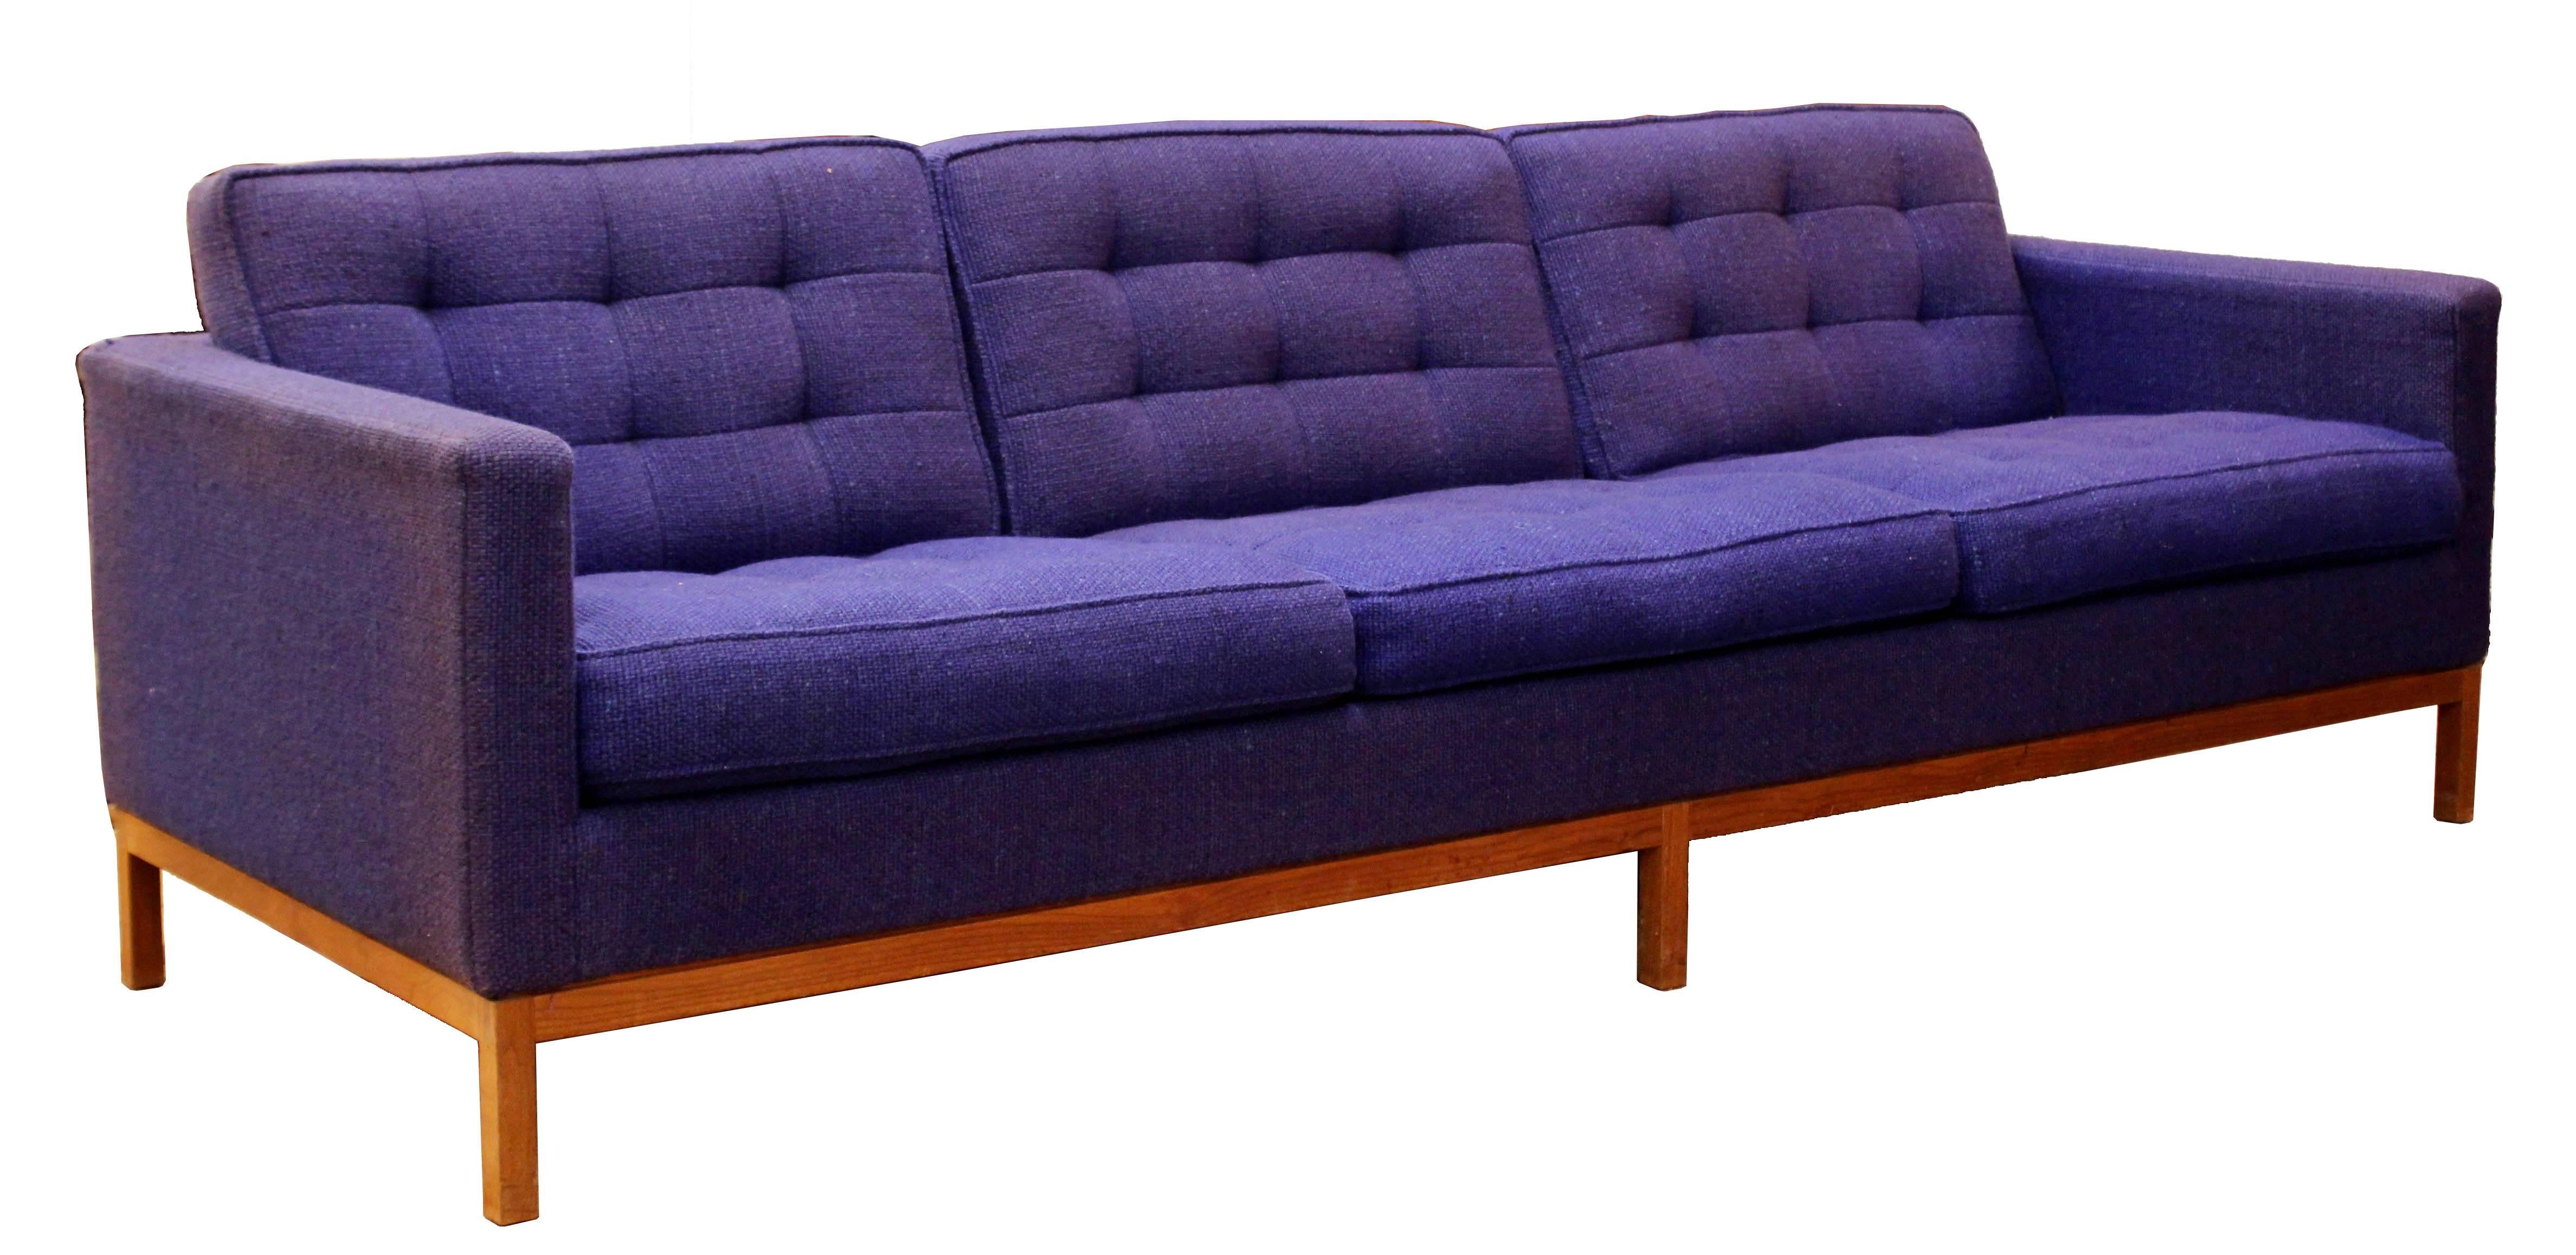 For your consideration is a magnificent and rare tufted blue upholstered sofa and loveseat set, by Florence Knoll Model #1205 S3, circa the 1950s. The fabric is original Knoll wool blend. Fabric, frame and foam are in excellent shape except for